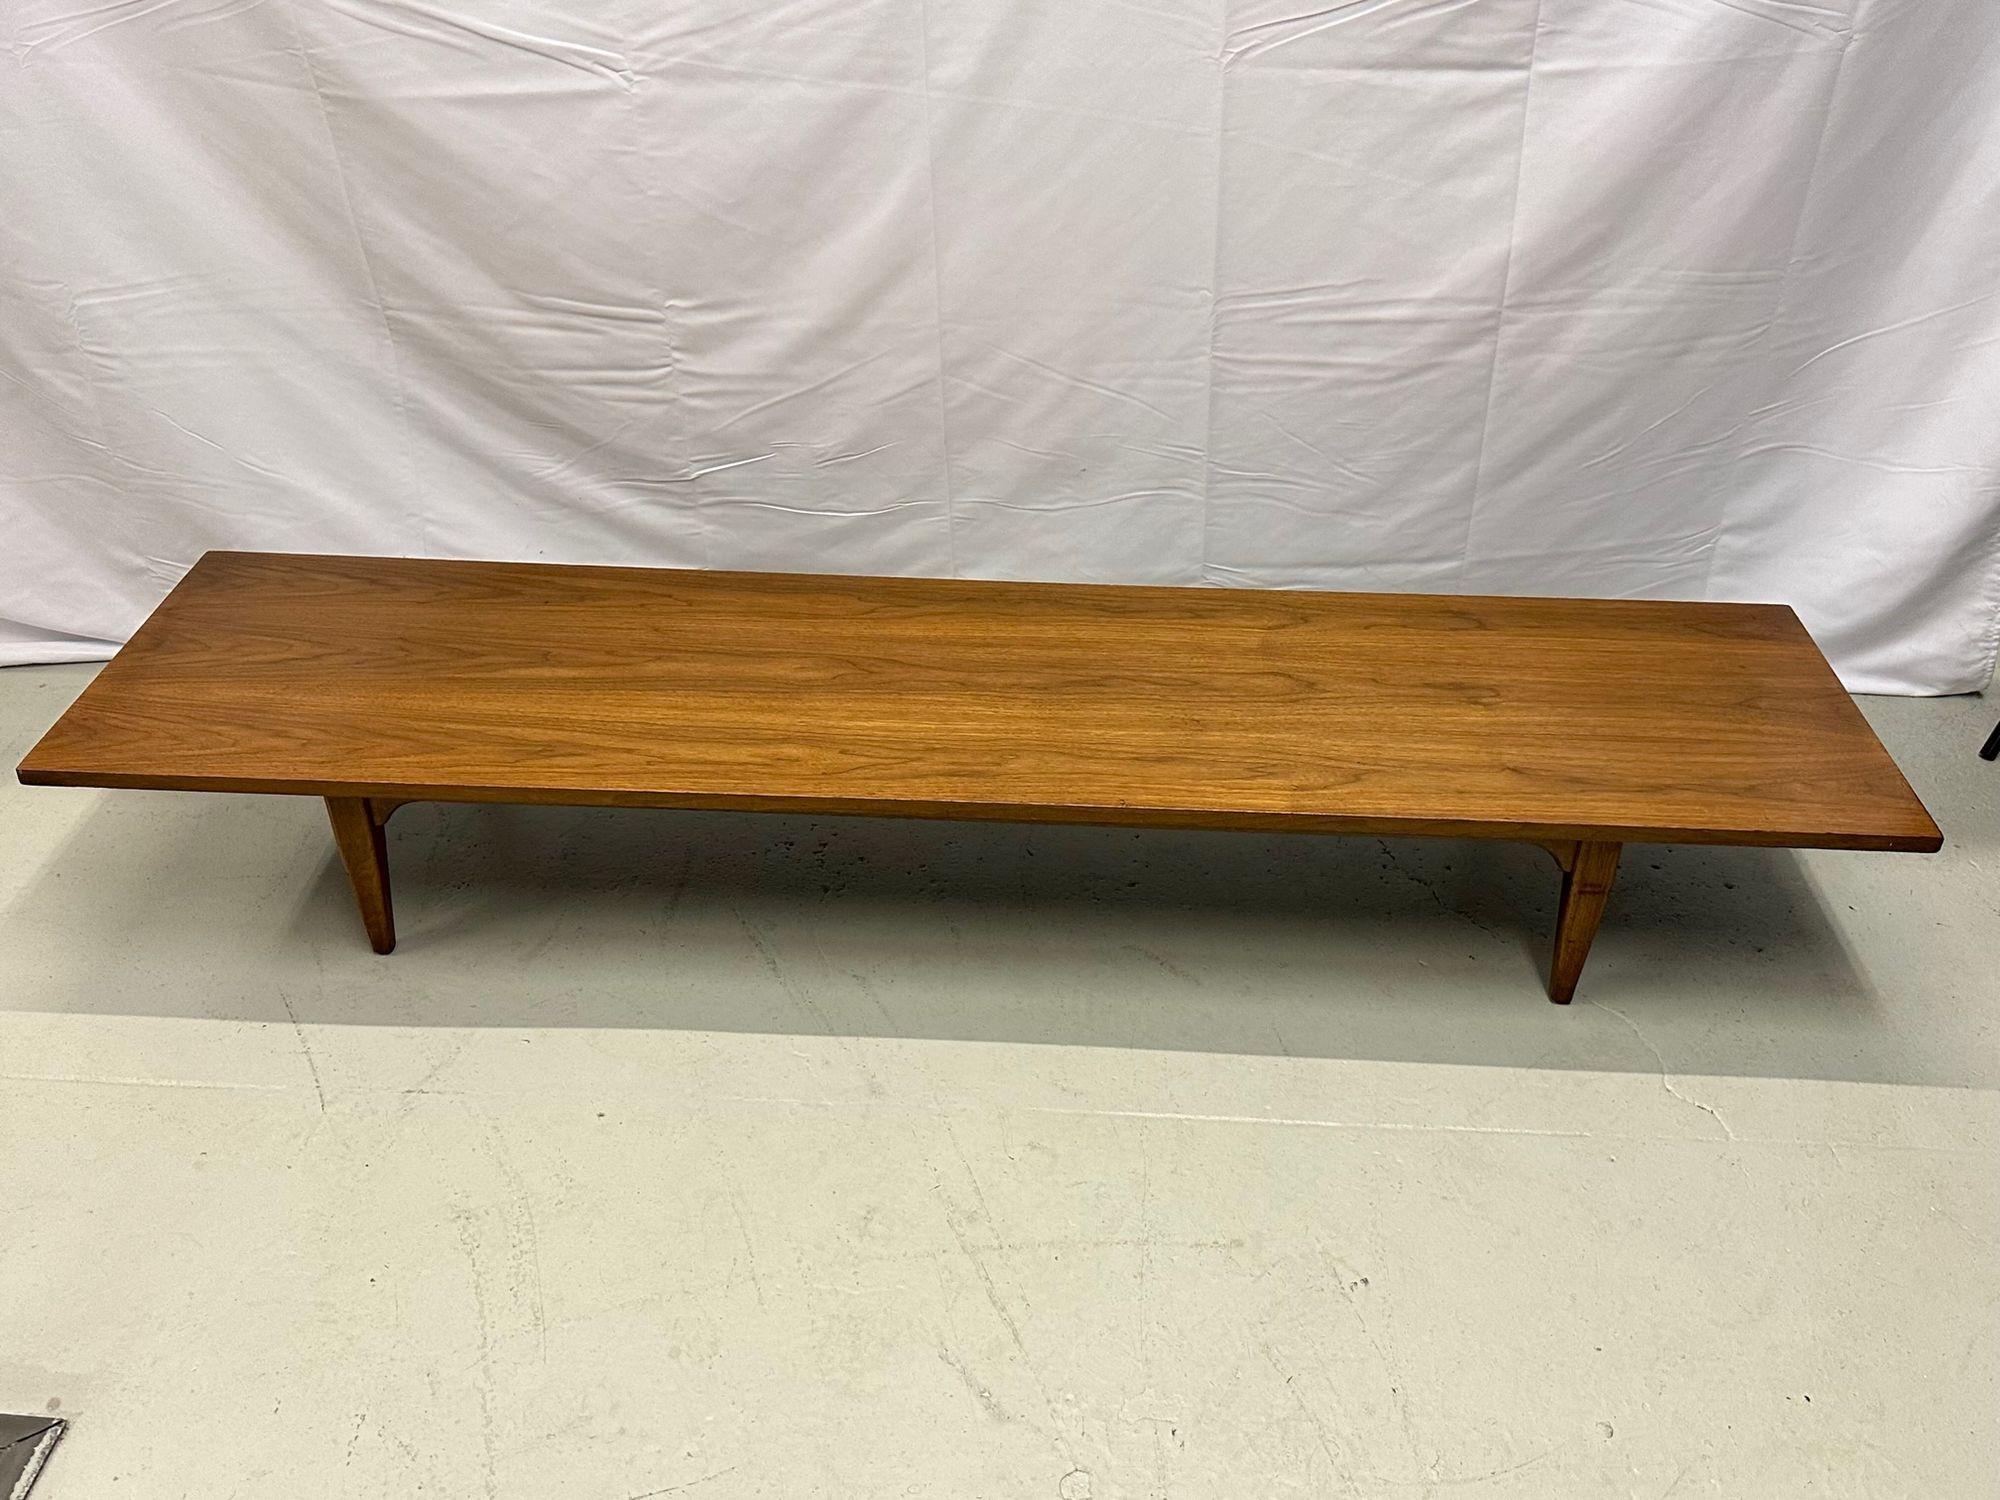 20th Century Danish Mid-Century Modern Cocktail or Coffee Table, 1950s, Solid Teak For Sale